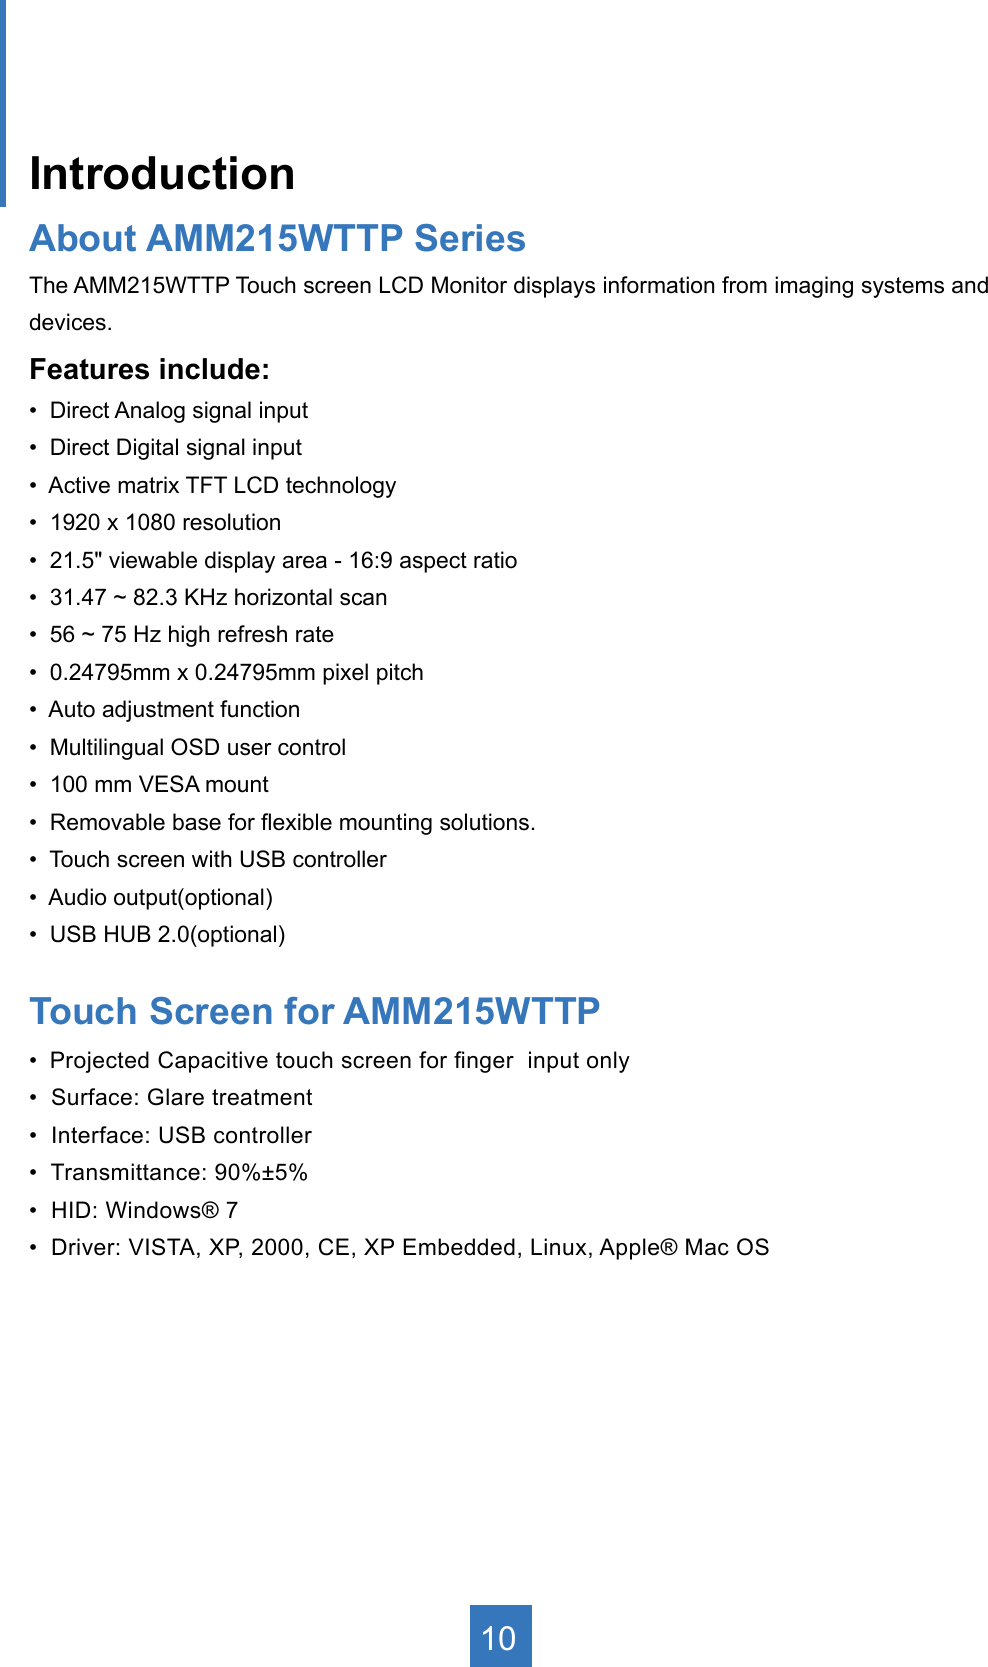 IntroductionAbout AMM215WTTP Series The AMM215WTTP Touch screen LCD Monitor displays information from imaging systems and devices.Features include:•  Direct Analog signal input•  Direct Digital signal input•  Active matrix TFT LCD technology•  1920 x 1080 resolution•  21.5&quot; viewable display area - 16:9 aspect ratio•  31.47 ~ 82.3 KHz horizontal scan•  56 ~ 75 Hz high refresh rate•  0.24795mm x 0.24795mm pixel pitch•  Auto adjustment function•  Multilingual OSD user control•  100 mm VESA mount•  Removable base for exible mounting solutions.•  Touch screen with USB controller•  Audio output(optional)•  USB HUB 2.0(optional)Touch Screen for AMM215WTTP •  Projected Capacitive touch screen for nger  input only•  Surface: Glare treatment•  Interface: USB controller•  Transmittance: 90%±5%•  HID: Windows® 7•  Driver: VISTA, XP, 2000, CE, XP Embedded, Linux, Apple® Mac OS10